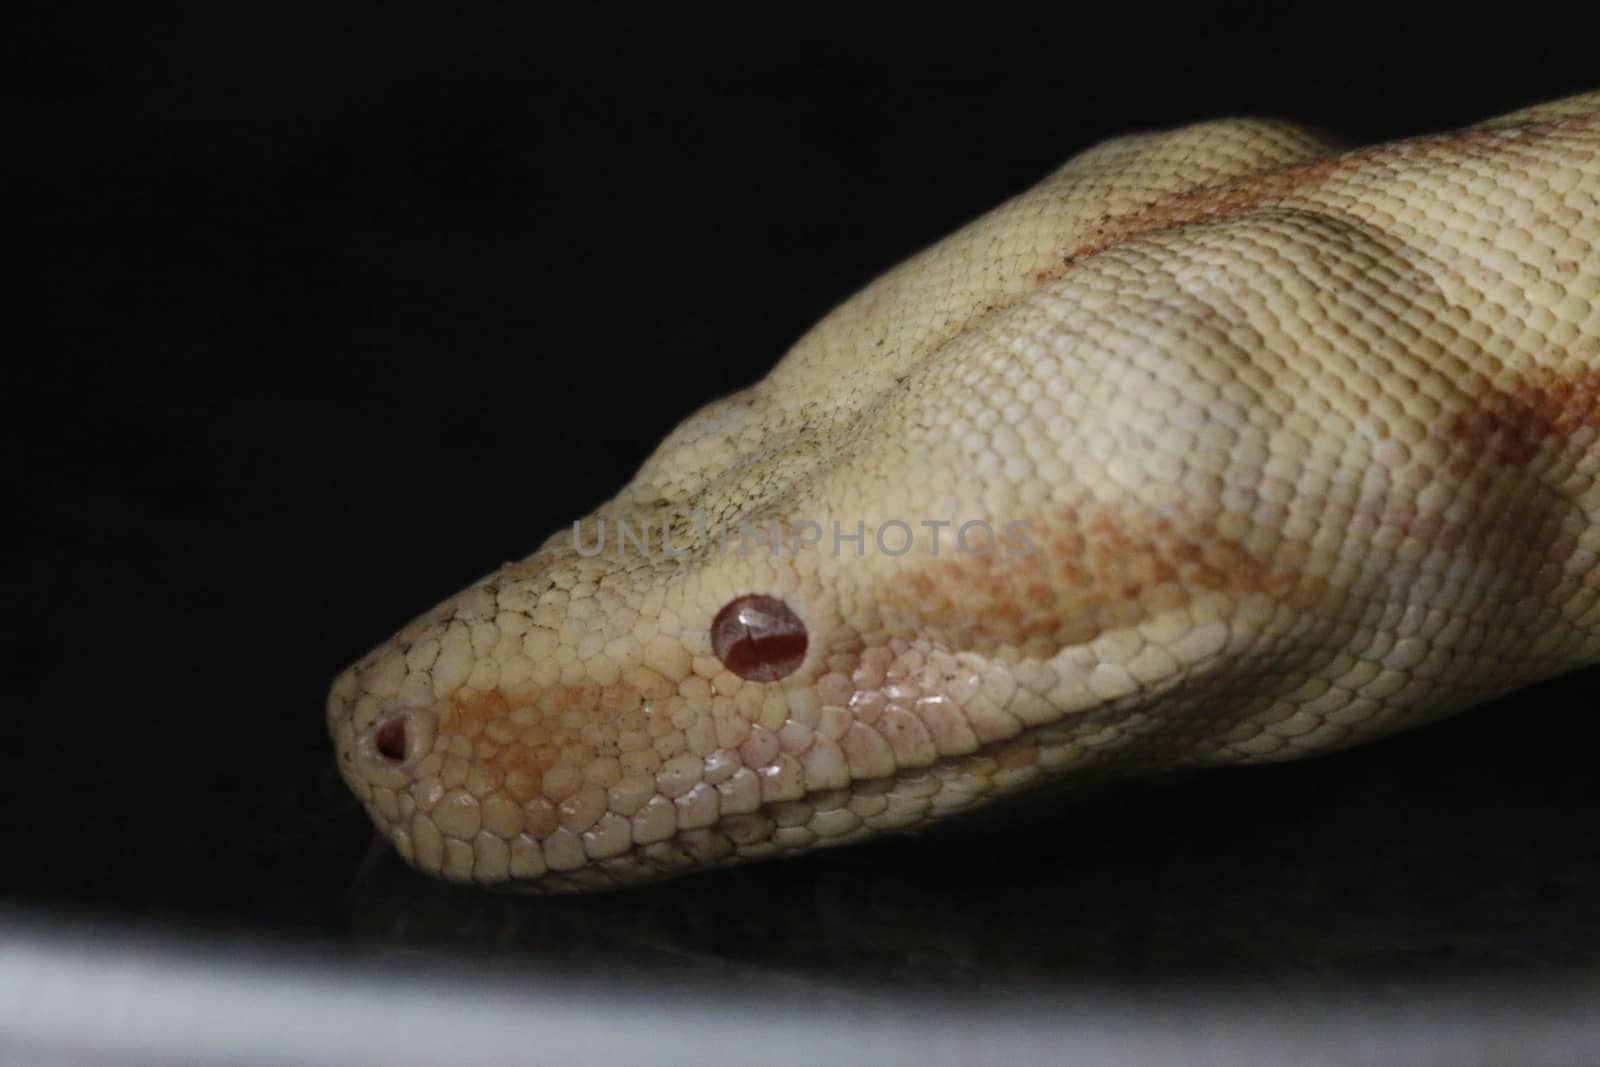 Close-up of Albinos Boa constrictor, Boa constrictor, 2 months old, in front of white background.